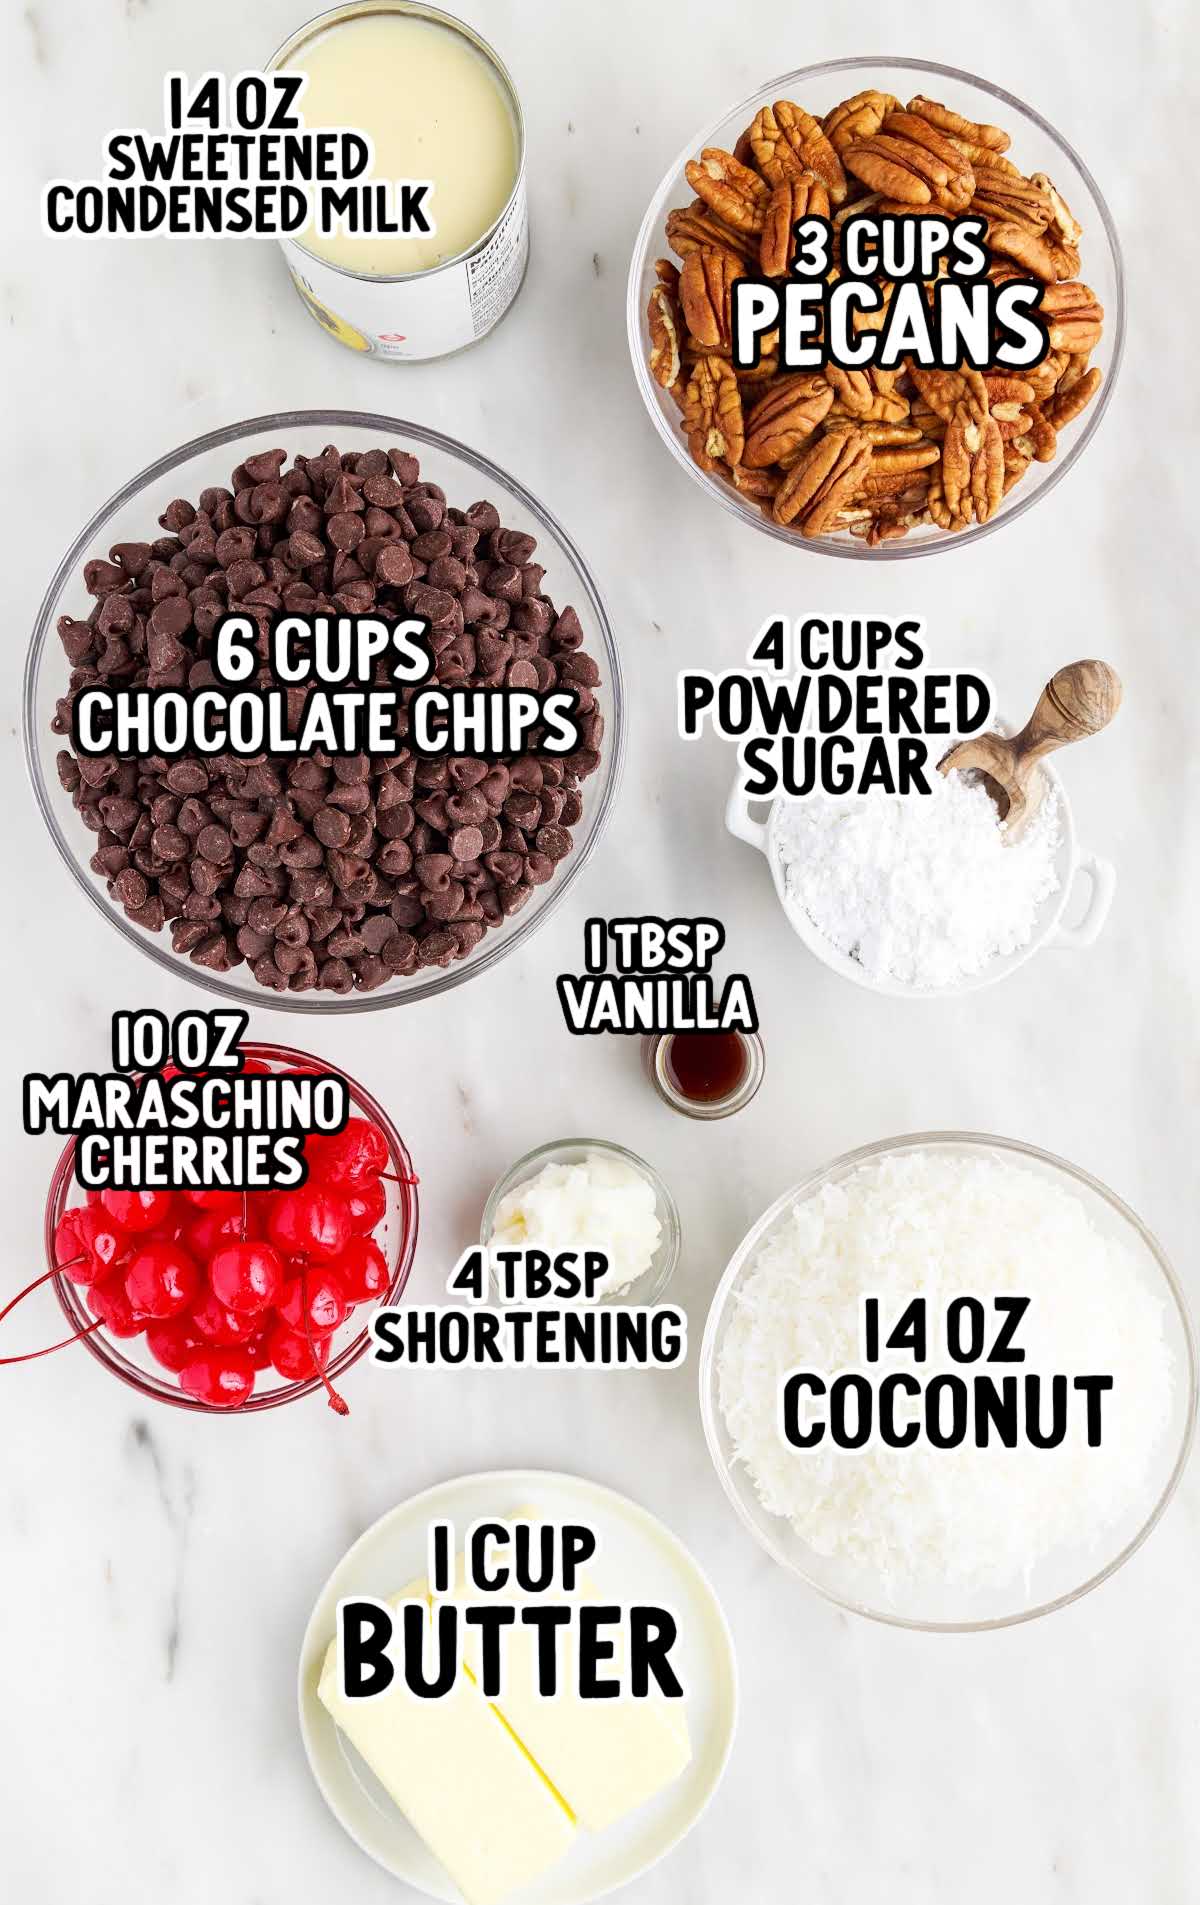 Martha Washington Candy raw ingredients that are labeled